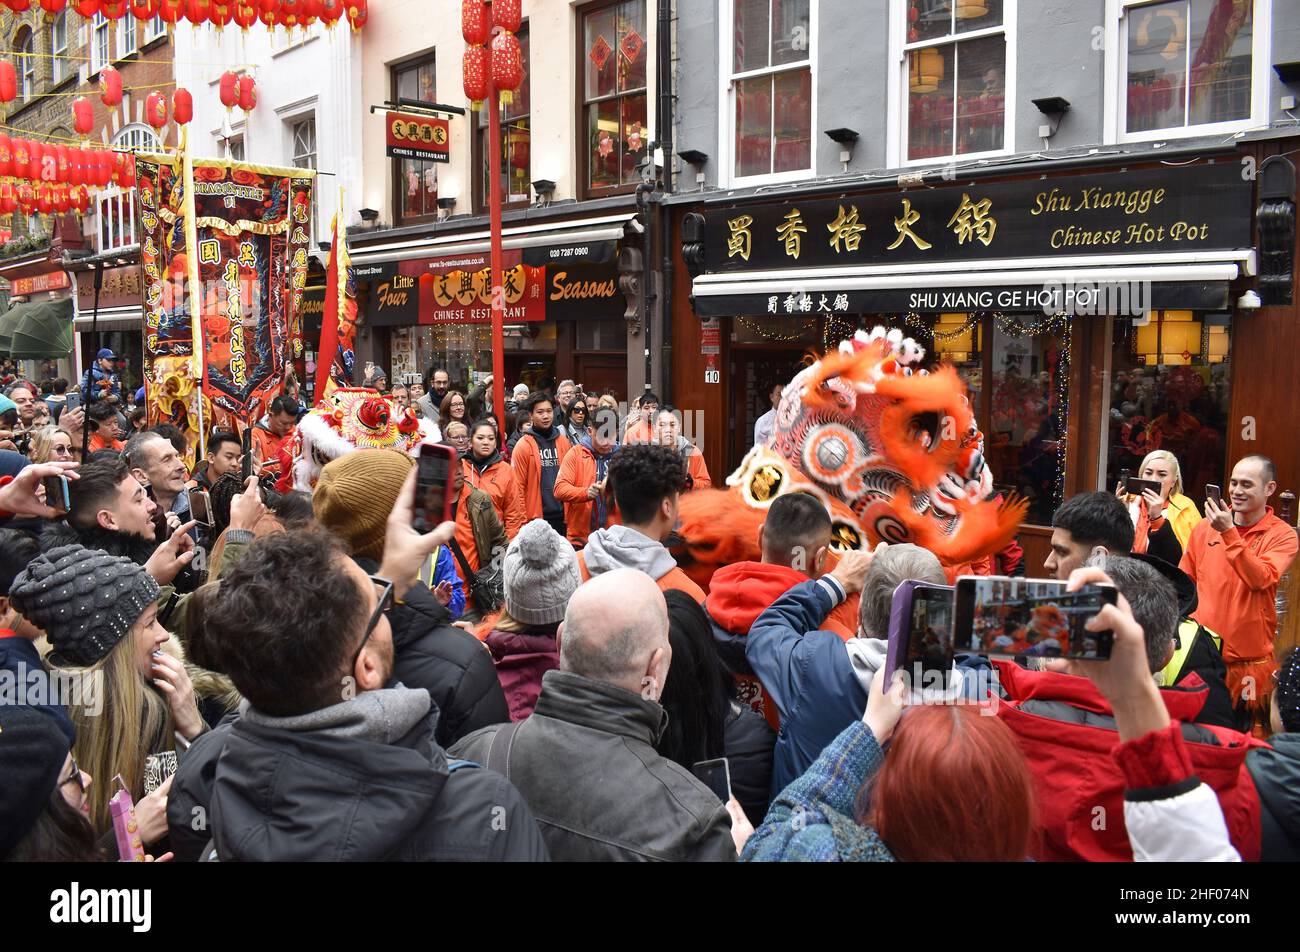 Crowded street of Chinatown, people celebrating Chinese New Year 2020 in London UK. Stock Photo